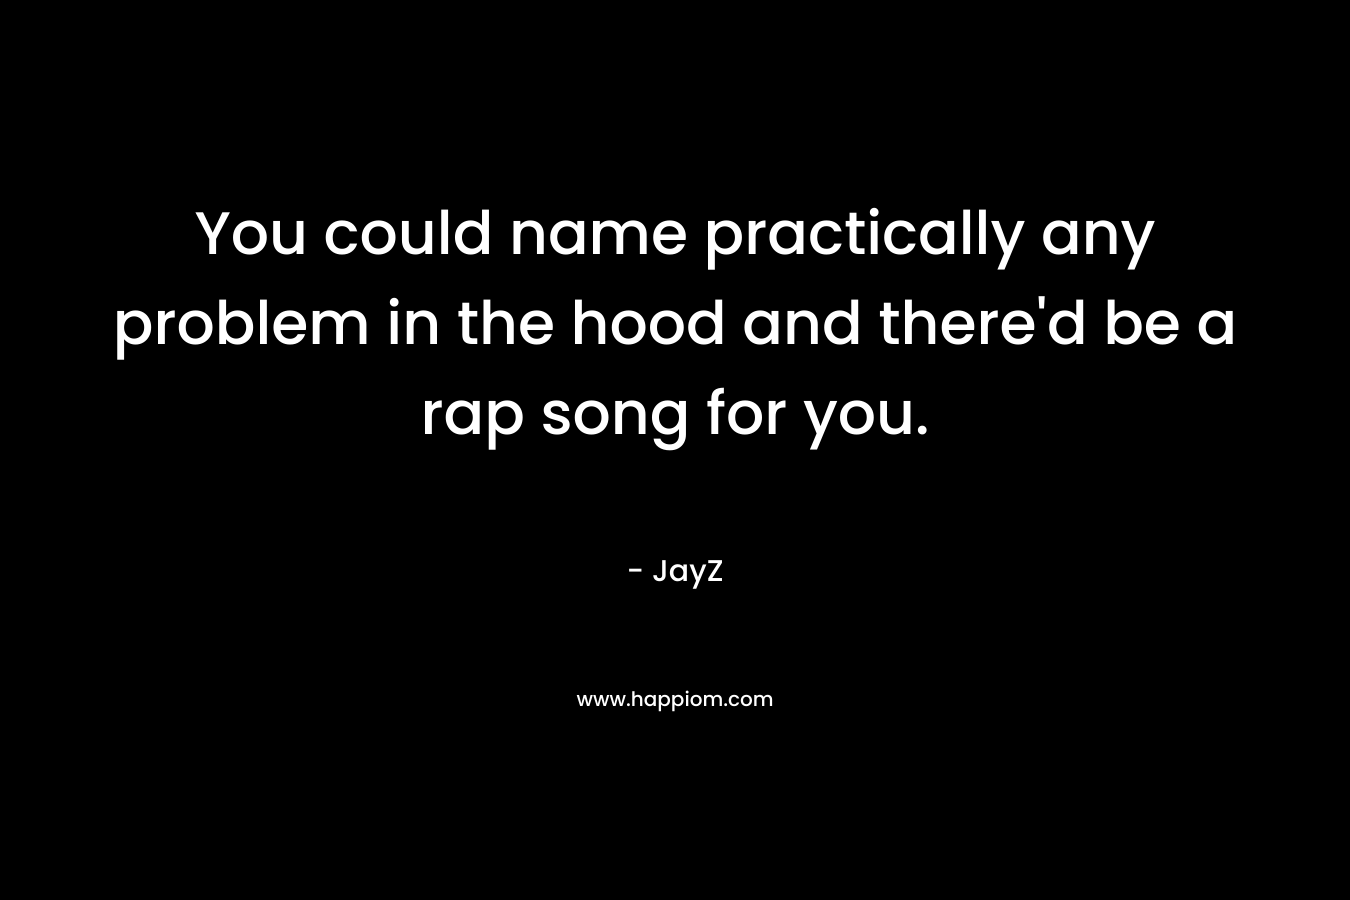 You could name practically any problem in the hood and there’d be a rap song for you. – JayZ